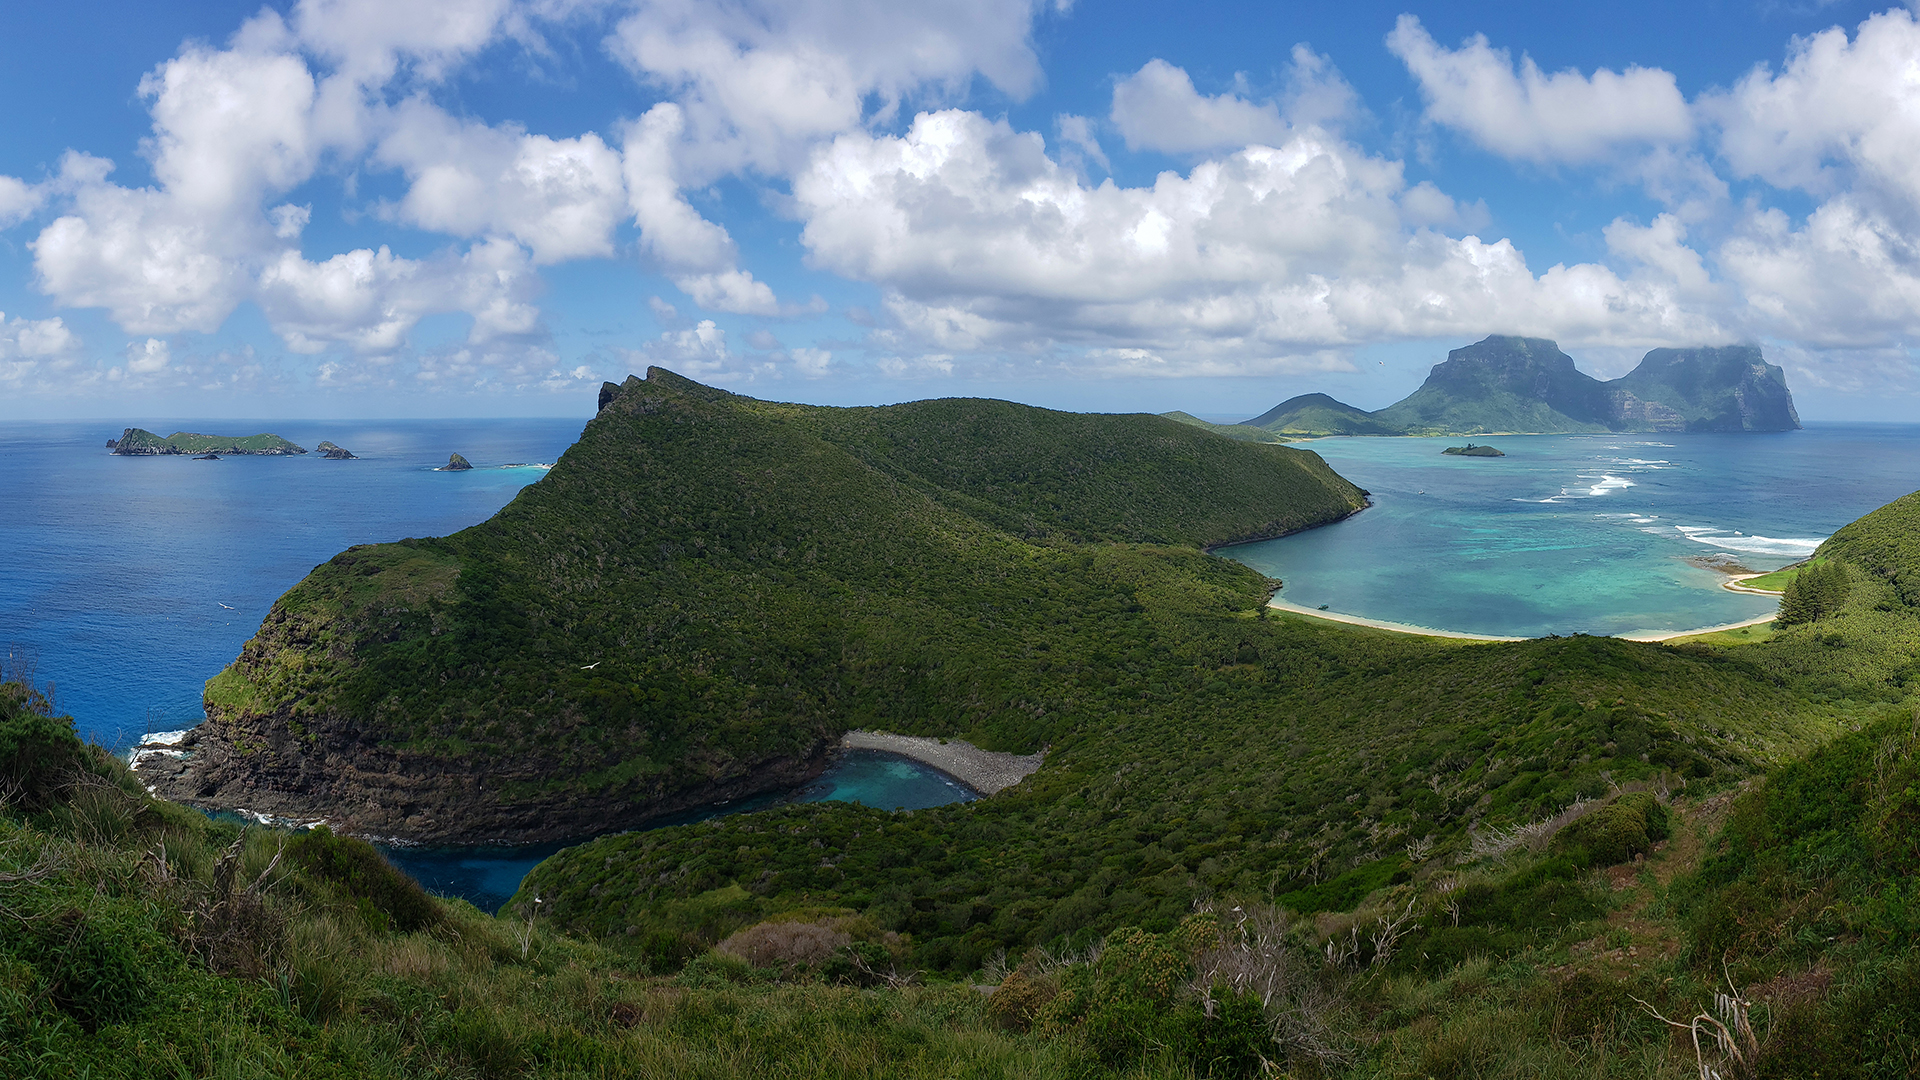 Lord Howe is a beautiful place!